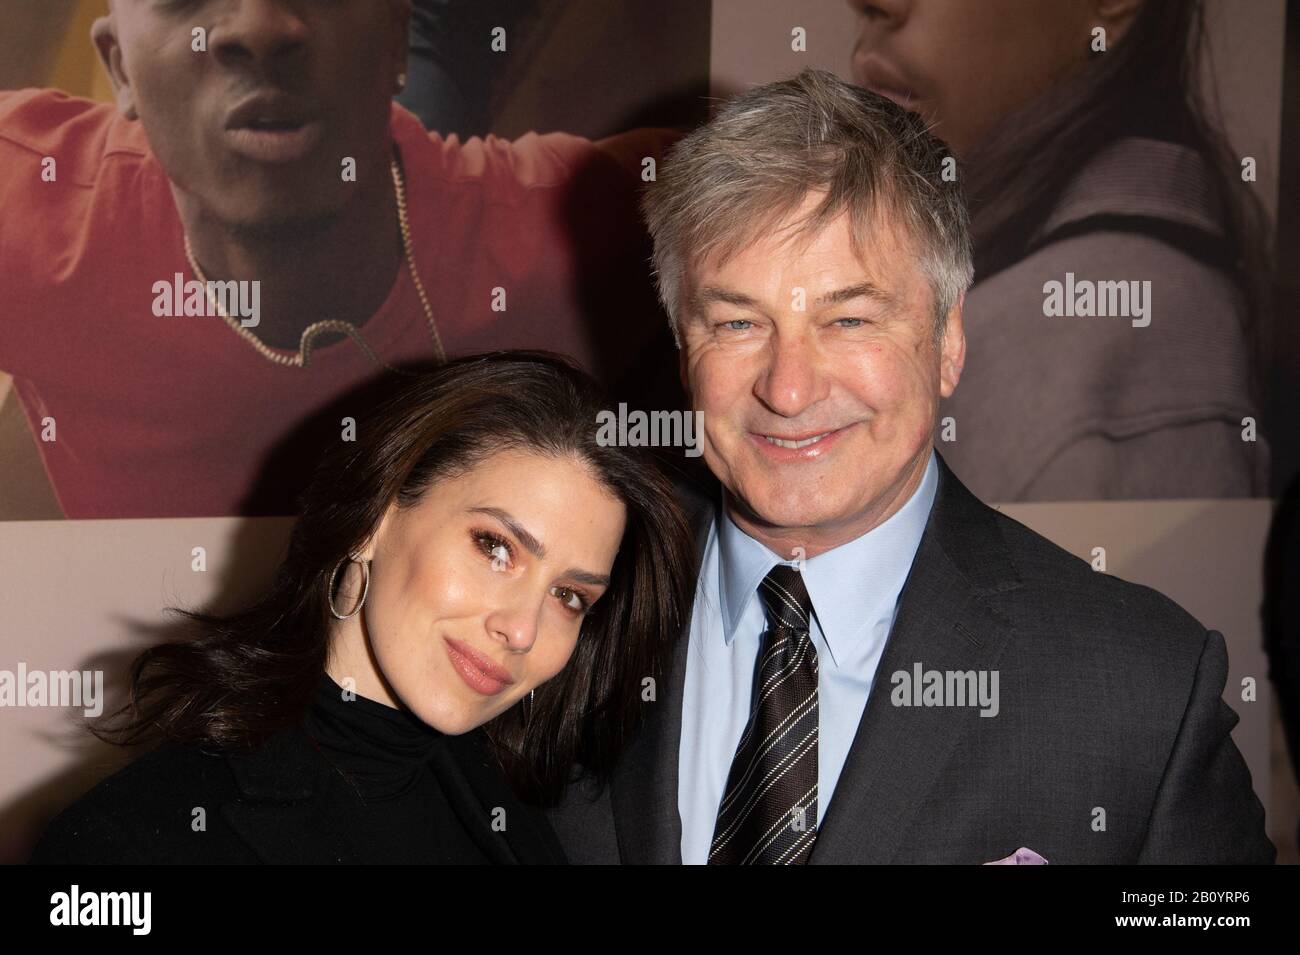 NEW YORK, NY - FEBRUARY 20: Hilaria Baldwin and Alec Baldwin attend opening night of 'West Side Story' on Broadway at The Broadway Theatre on February Stock Photo